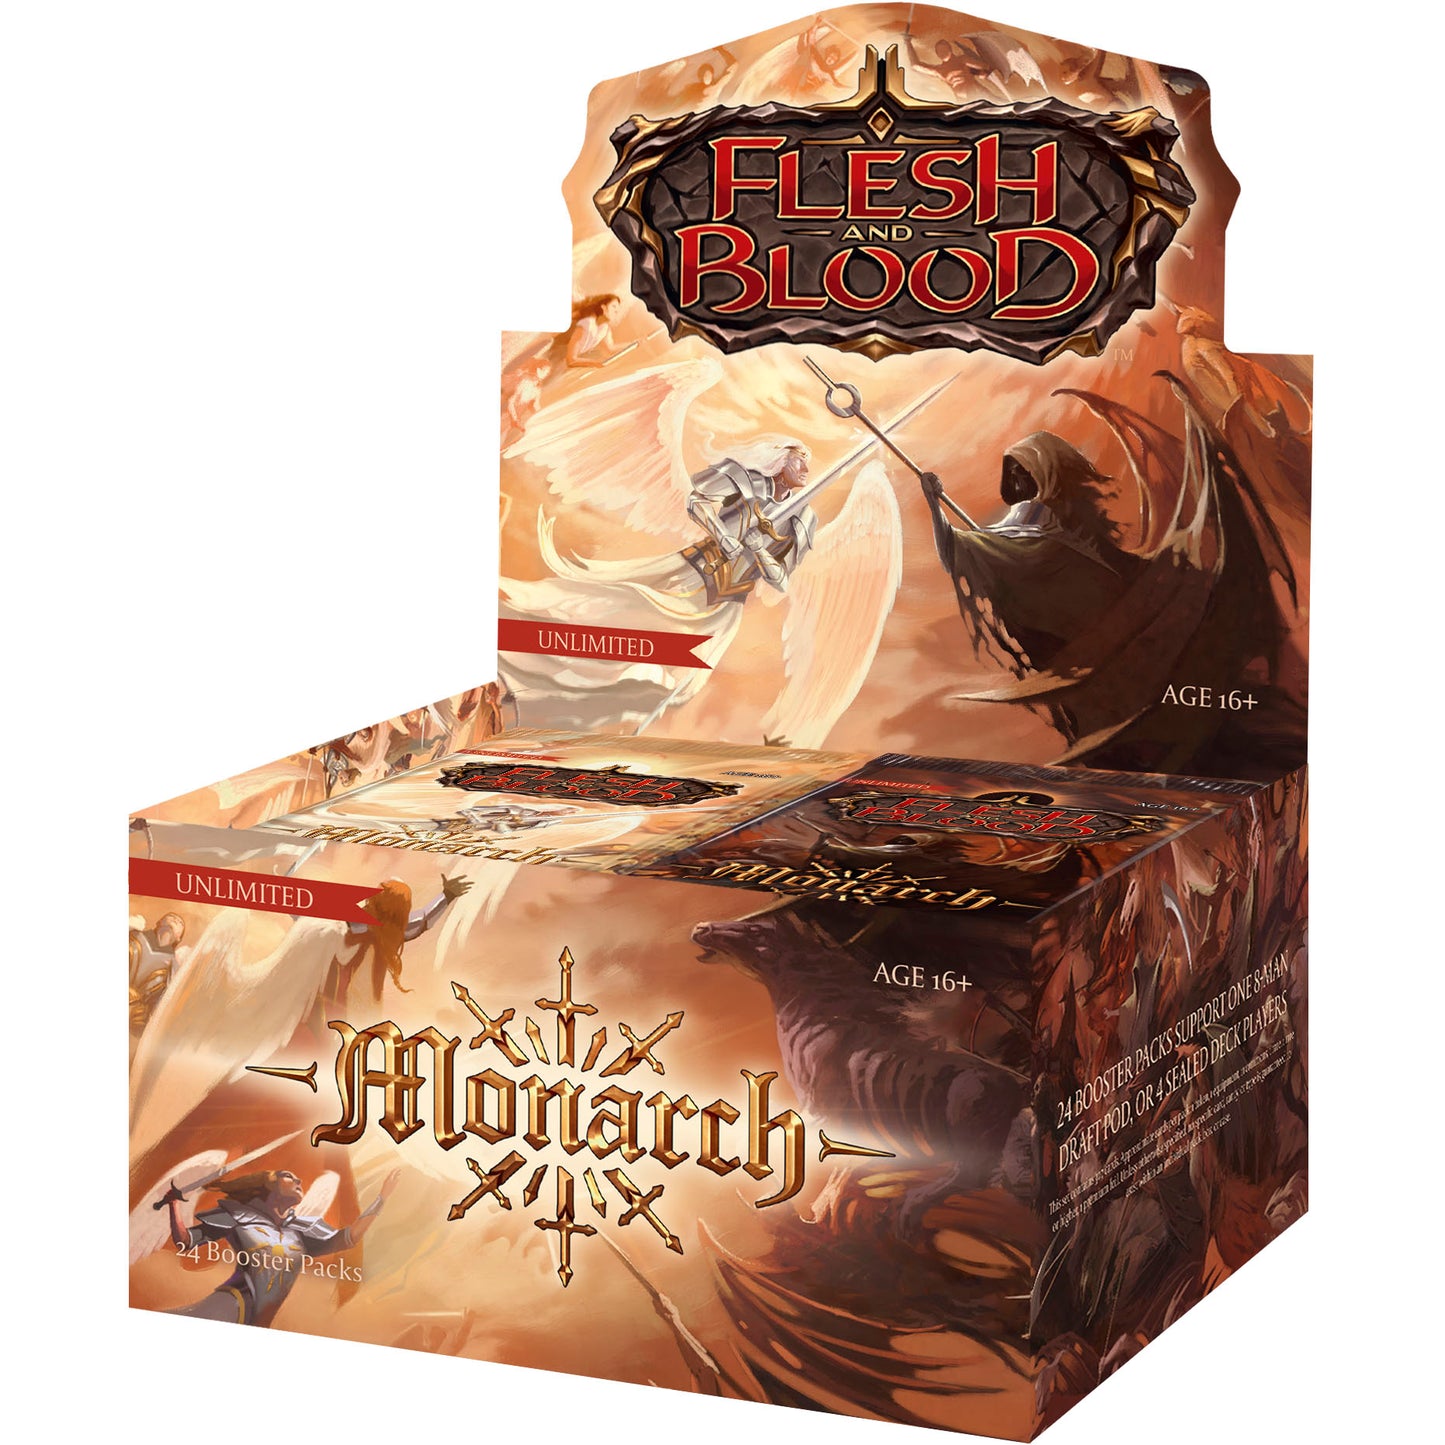 Flesh and Blood Monarch Booster Box unlimited edition